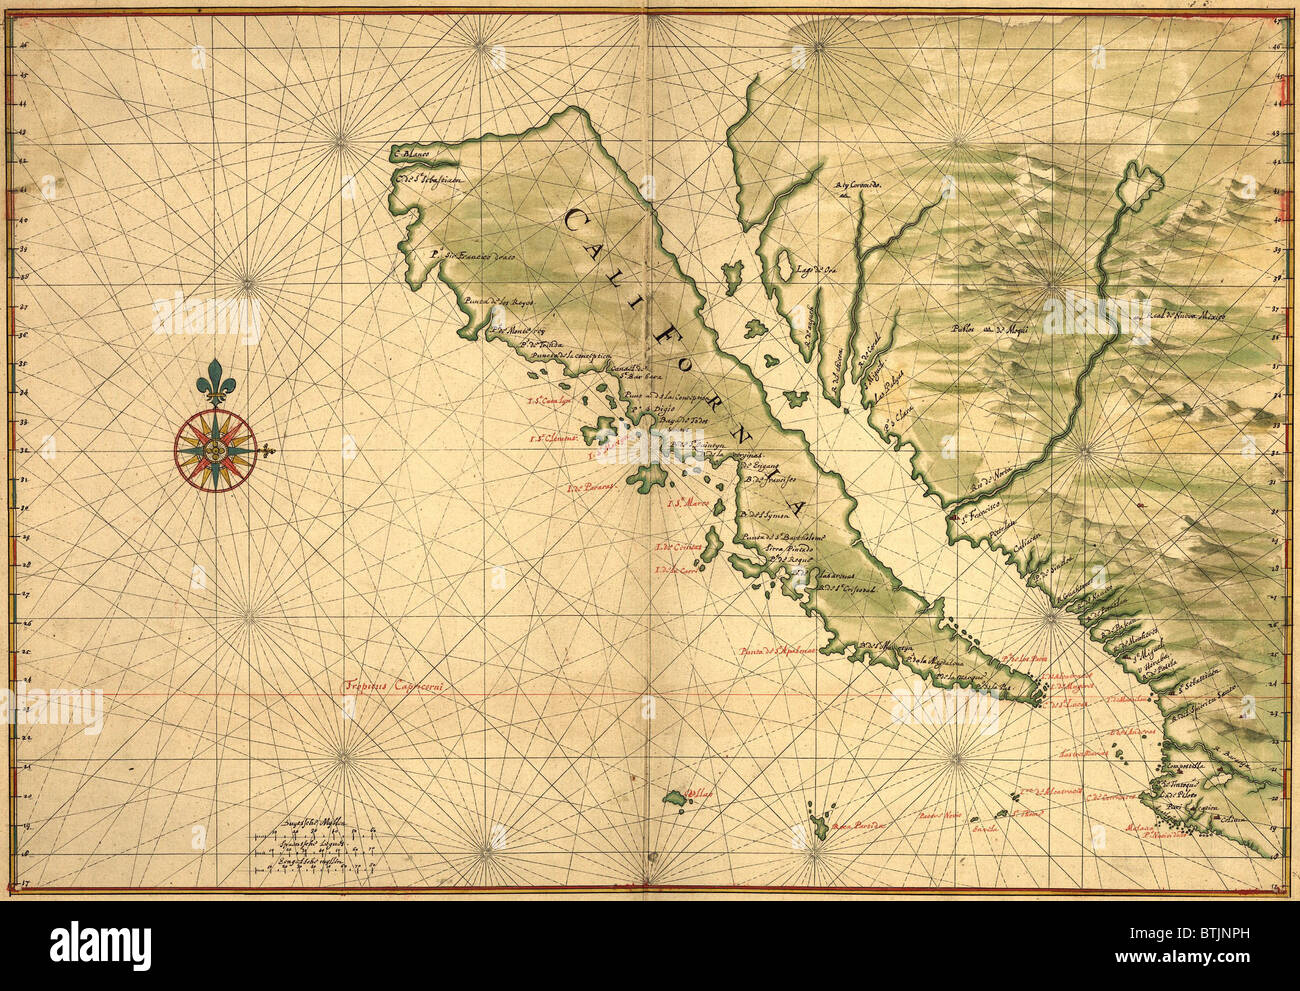 1650 Map Of Baja California And Northwest Mexico Showing California BTJNPH 